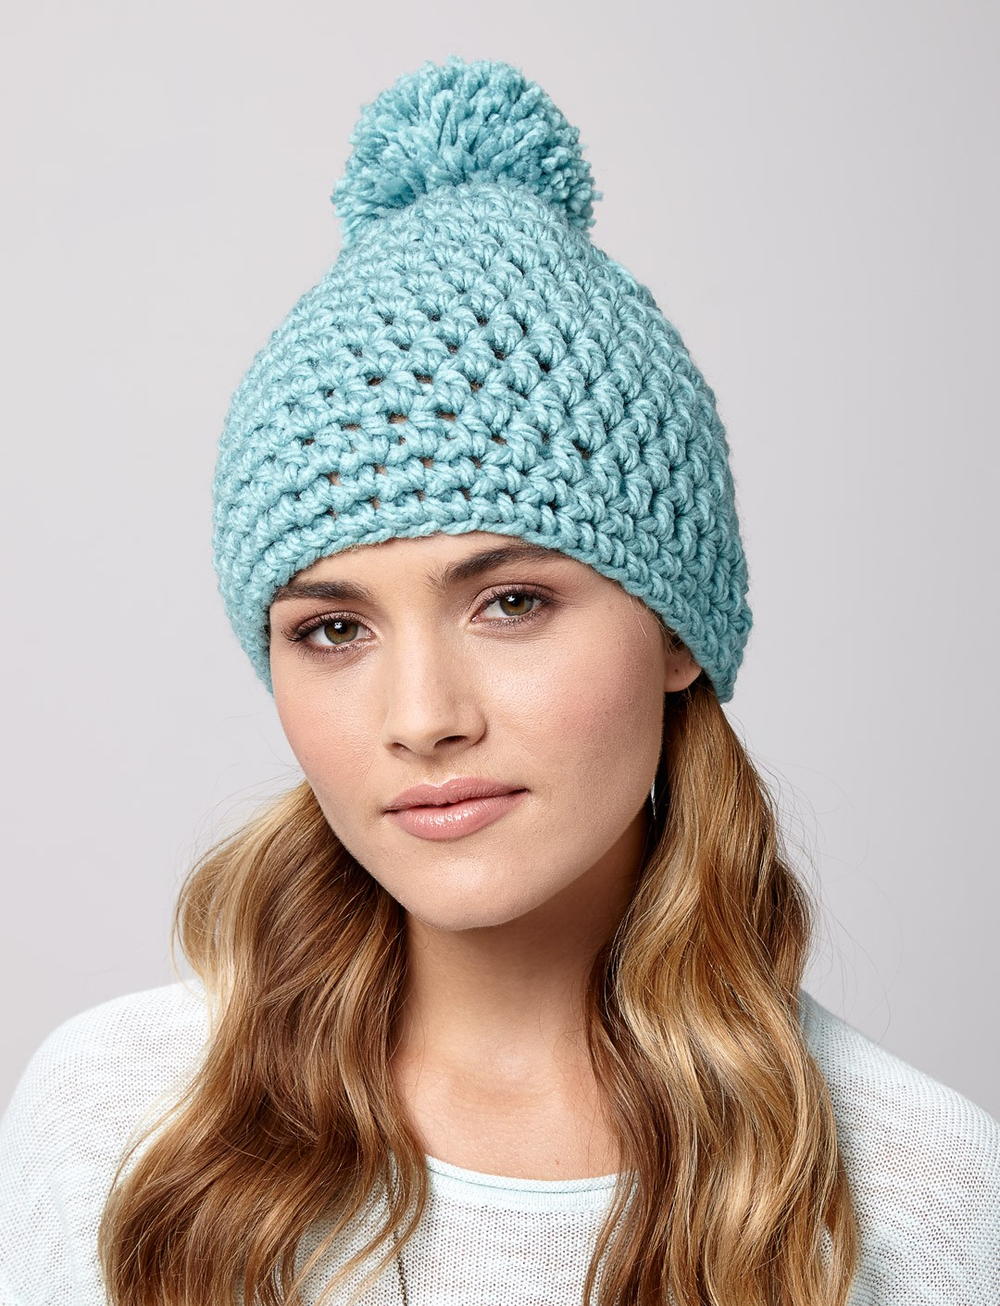 The best crochet hat patterns to keep you comfortable